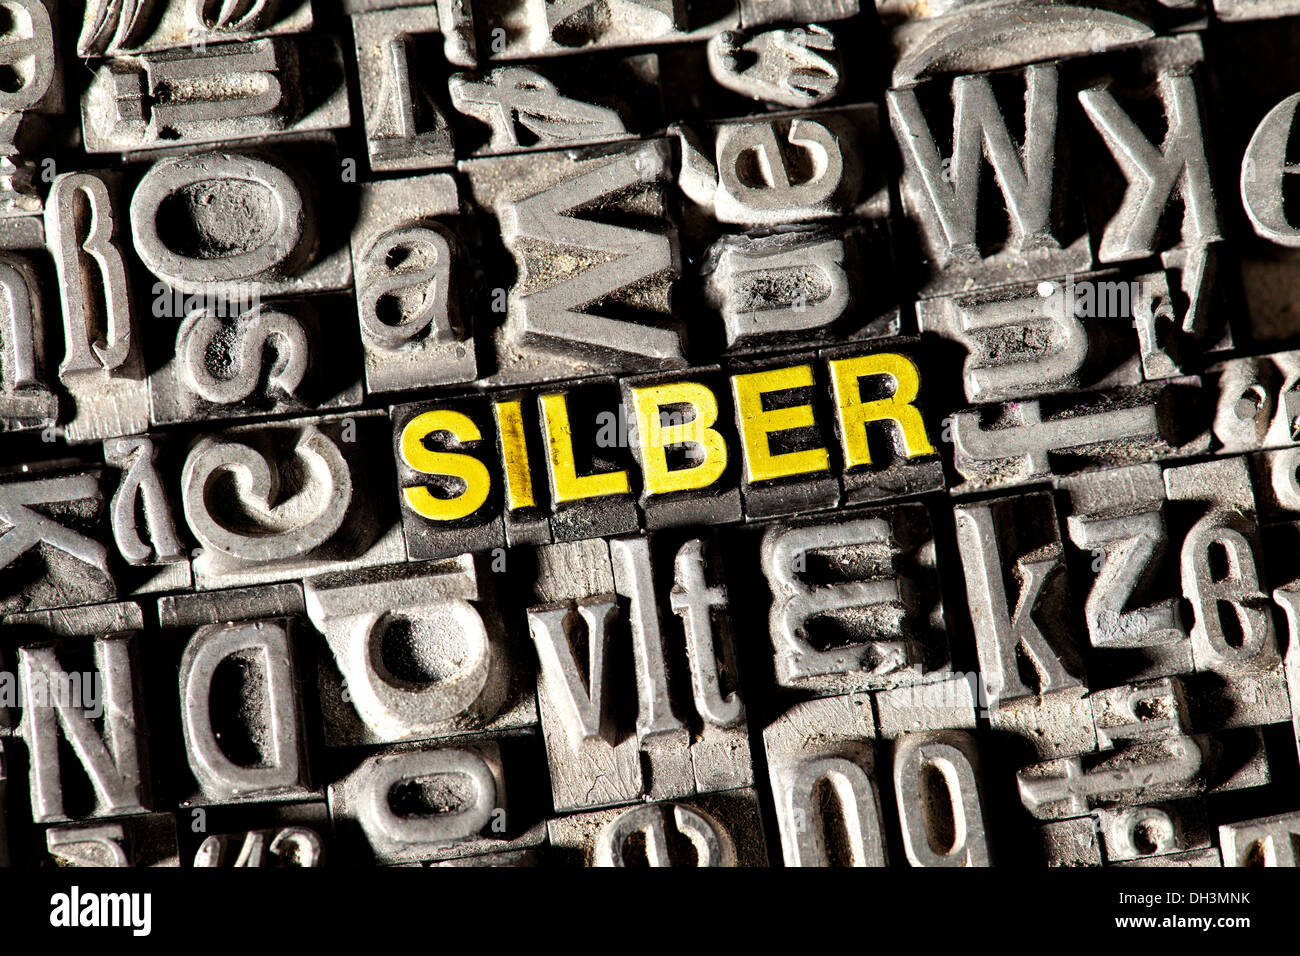 Old lead letters forming the word 'SILBER', German for 'SILVER' Stock Photo